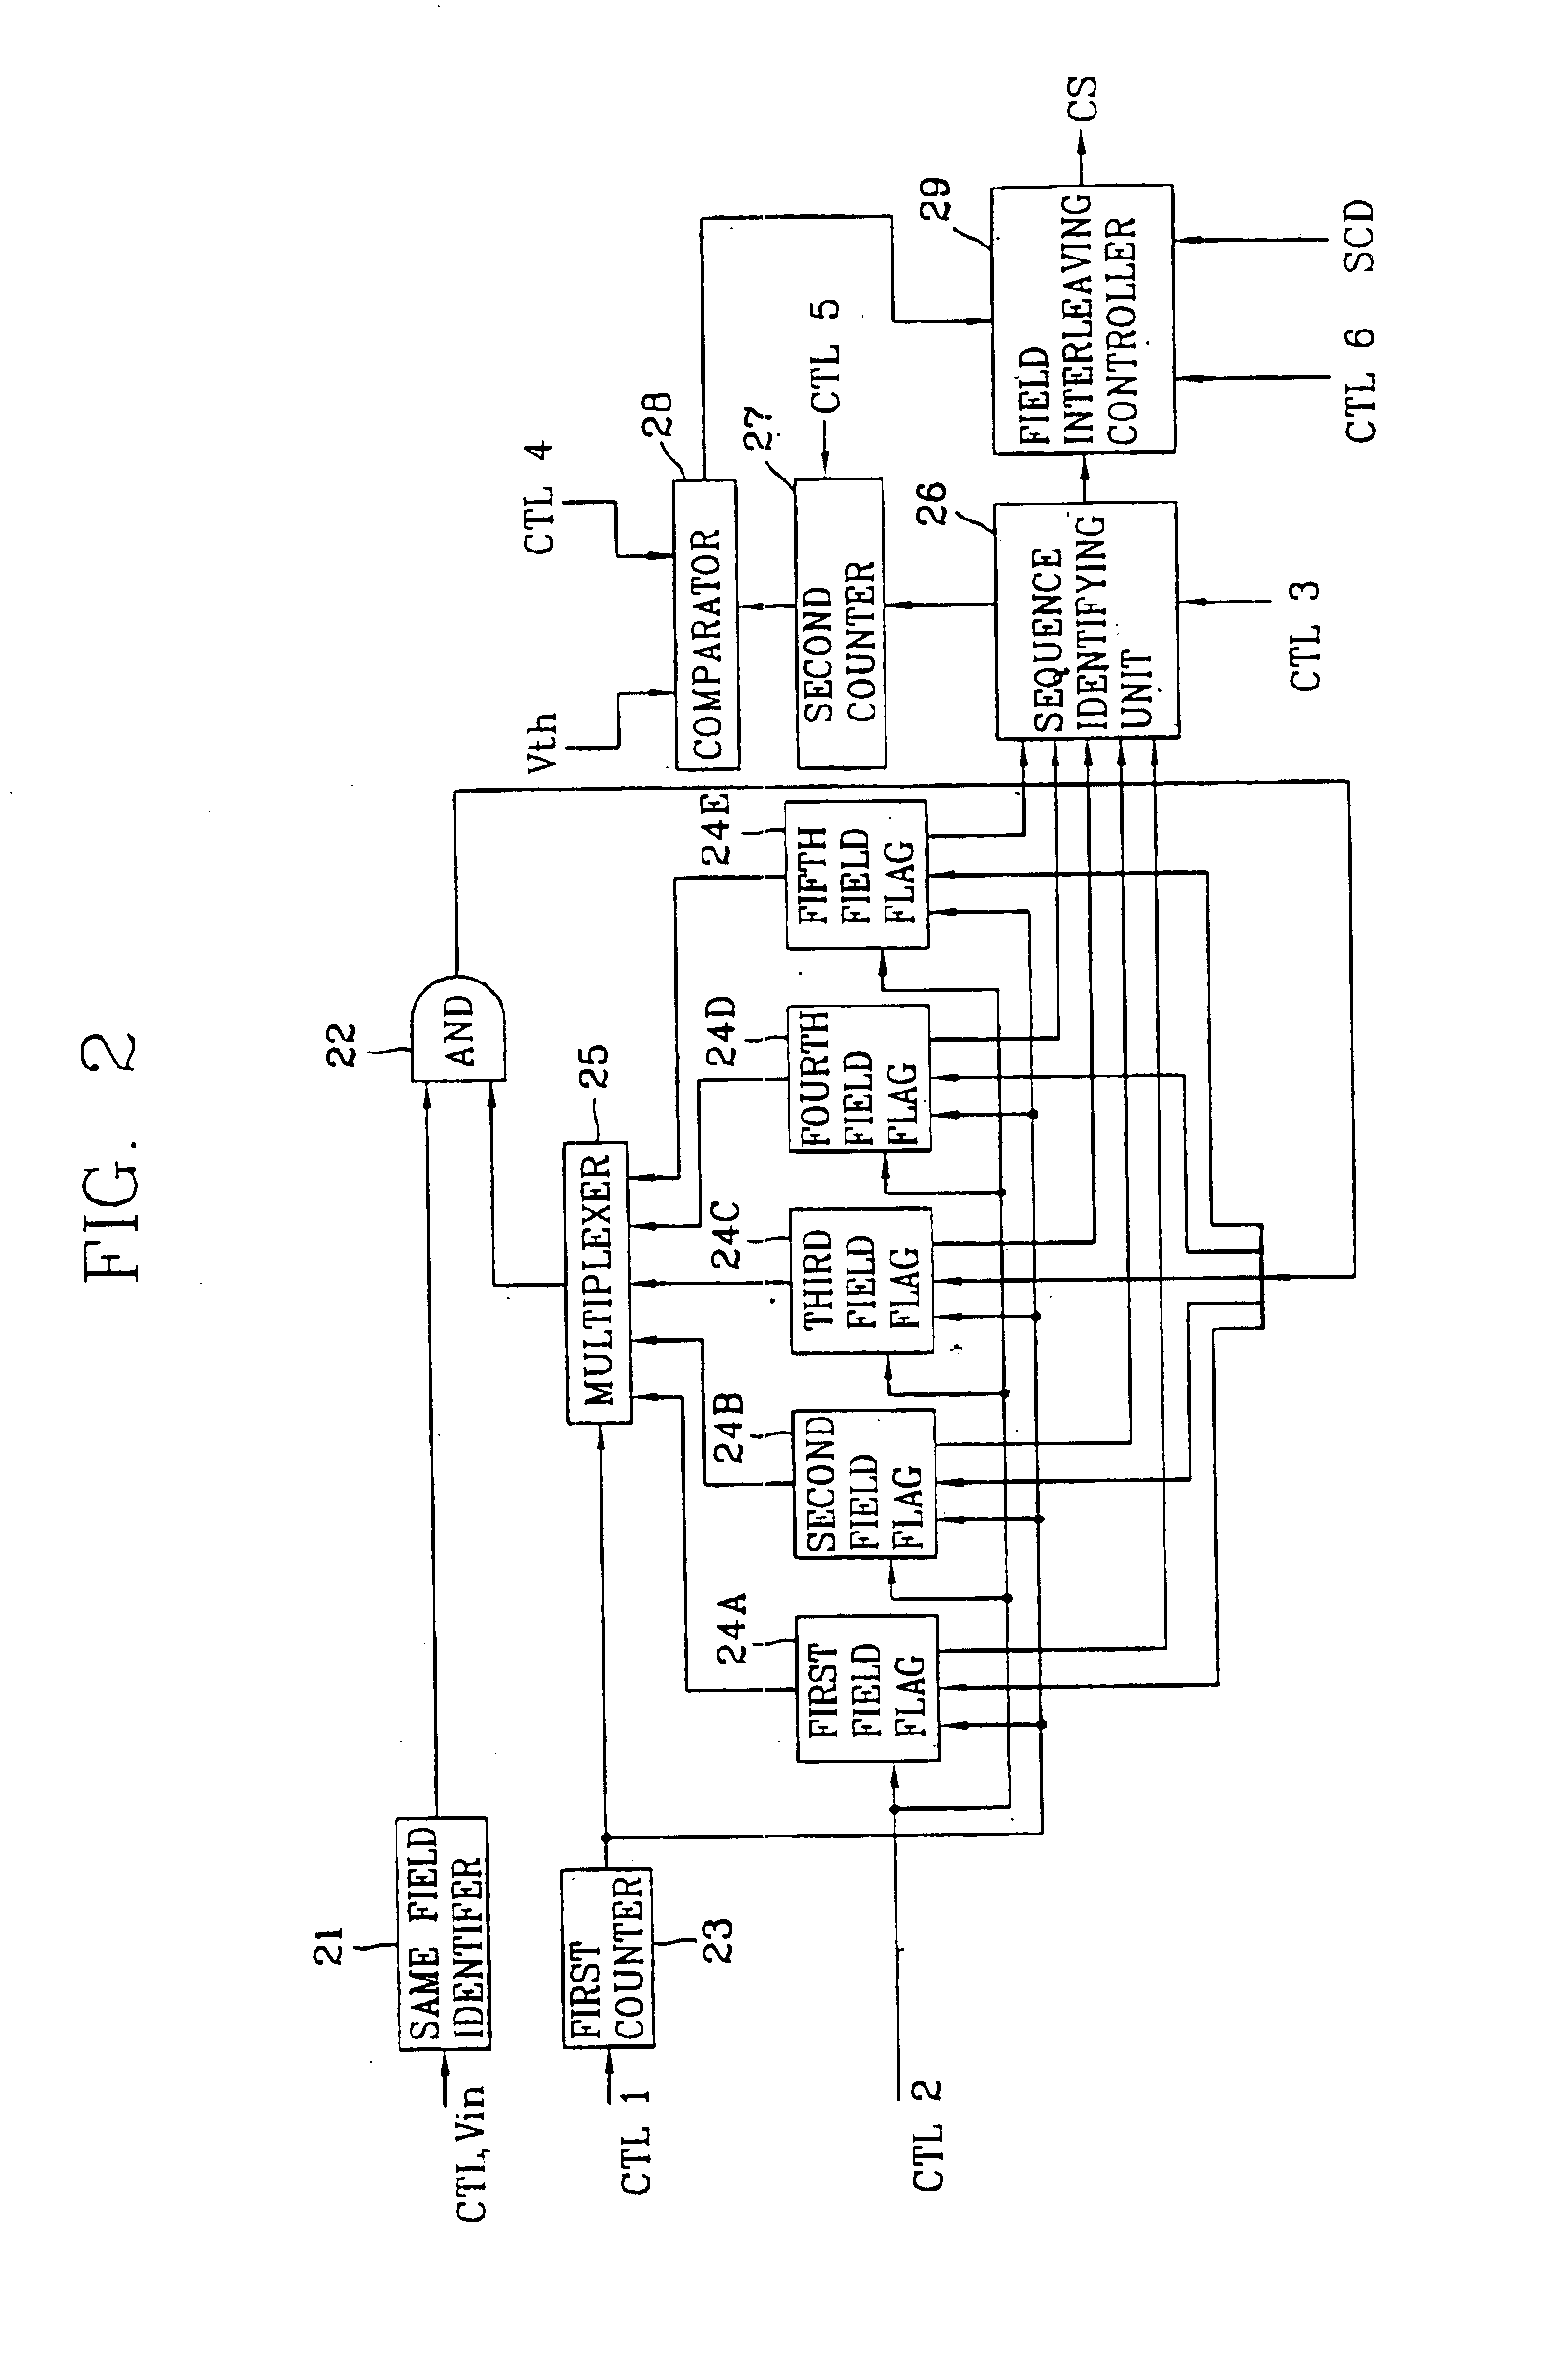 Method and apparatus for improving video quality